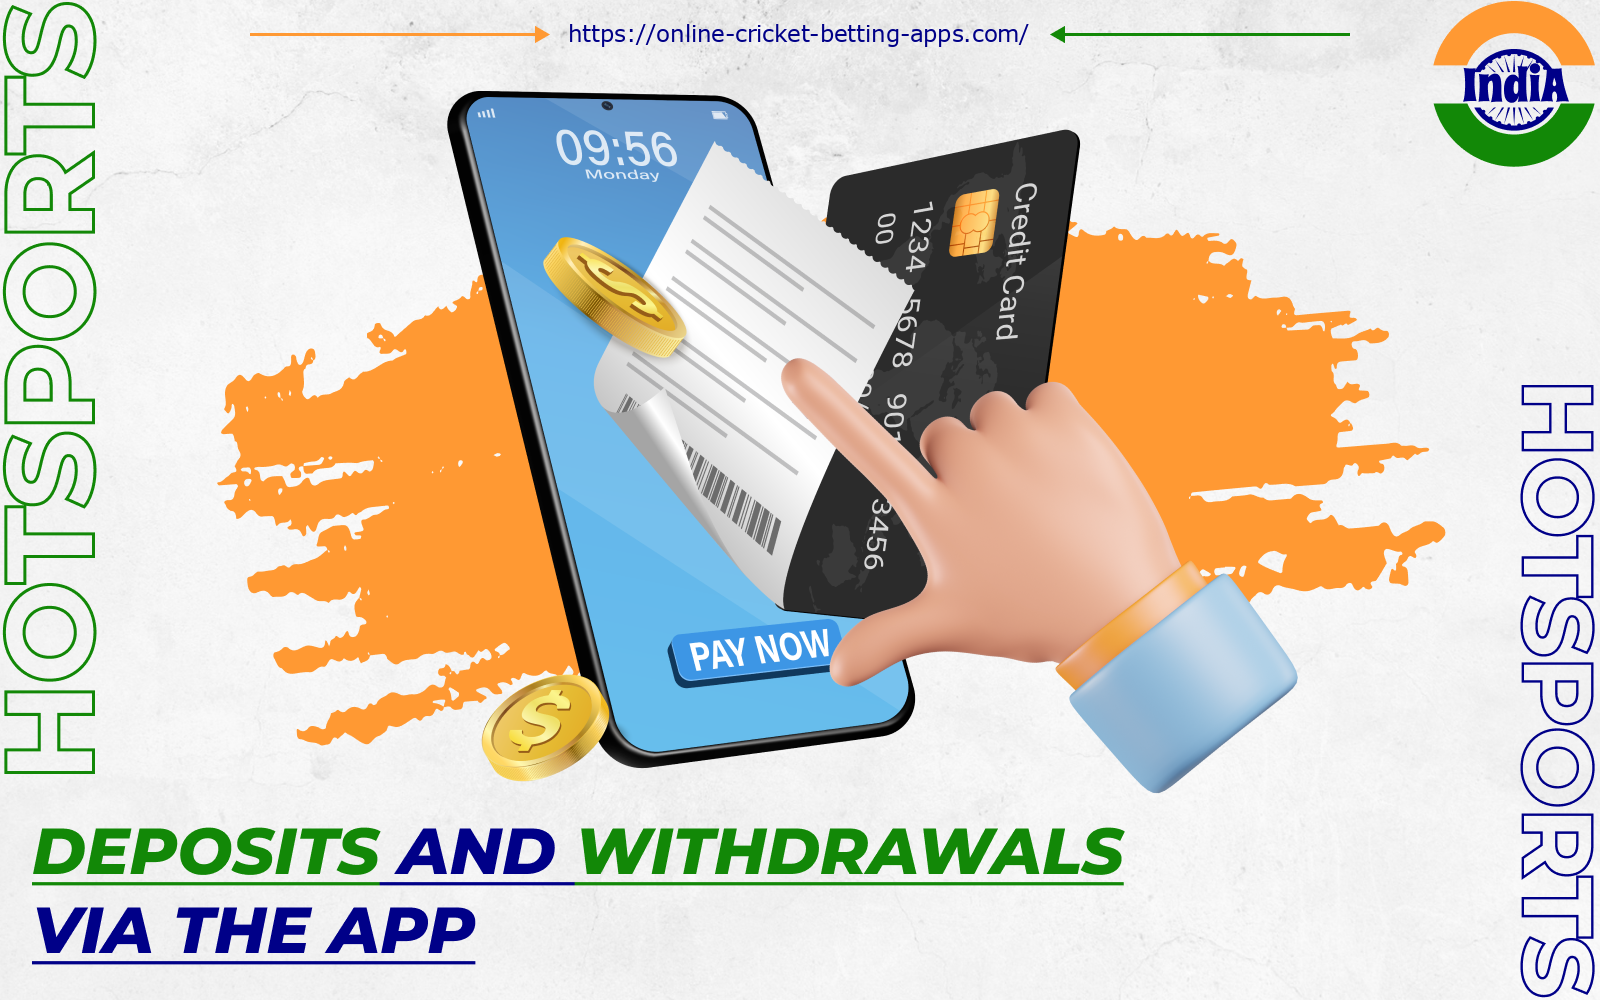 Through the Hot Sports app, Indian users can manage their balance, make deposits and withdrawals